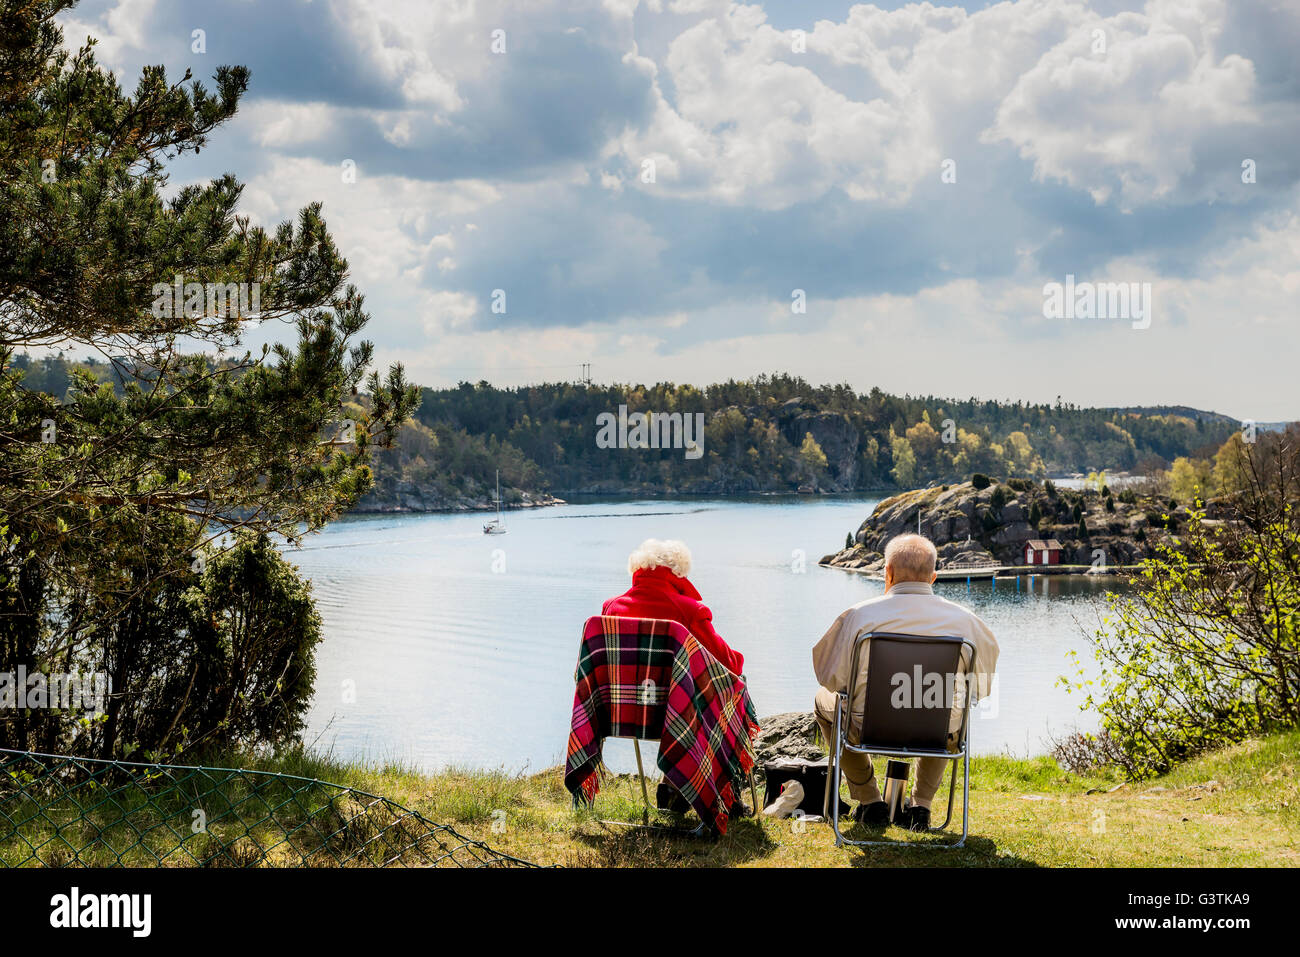 Sweden, West Coast, Bohuslan, Senior couple sitting on lounge chairs and looking at view Stock Photo